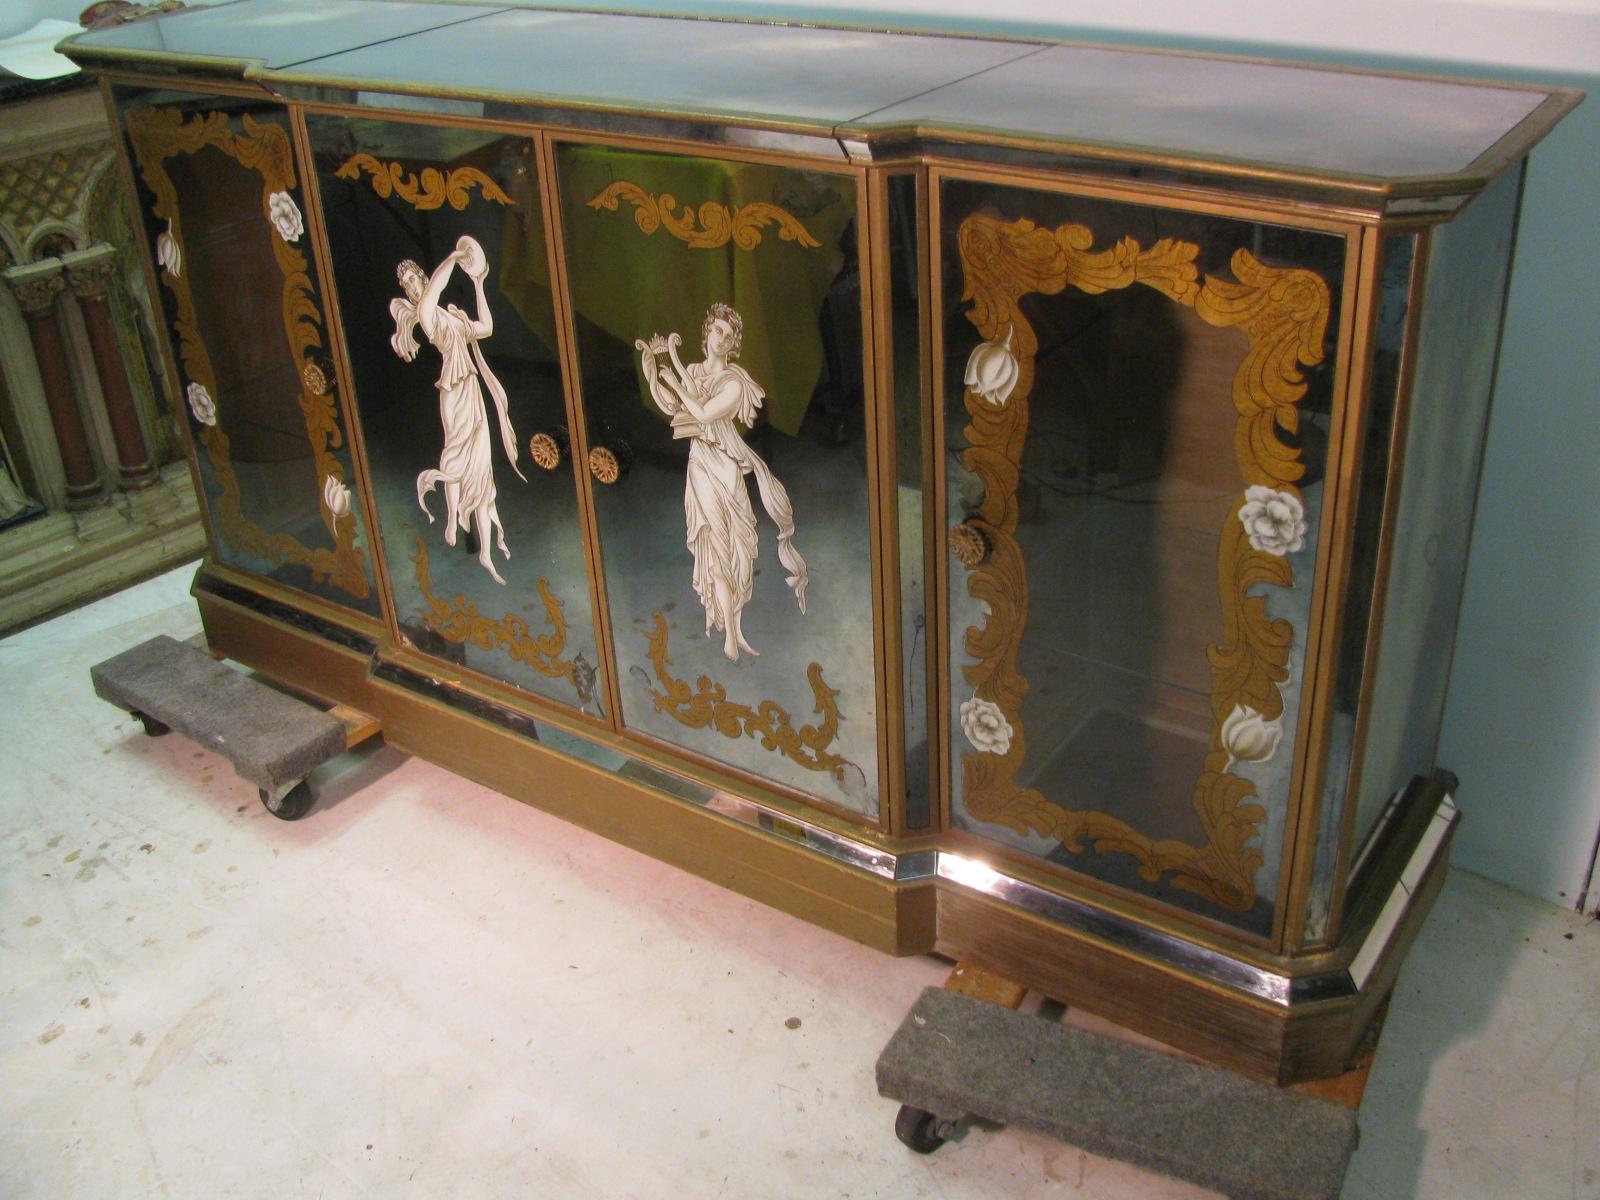 Fabulous mirrored cabinet which can used as a sideboard, buffet or as a total bar. Centre top panel opens to reveal a mirrored work space and a mirrored well for bottles. Centre doors with Églomisé decoration open for storage. Side doors framed with